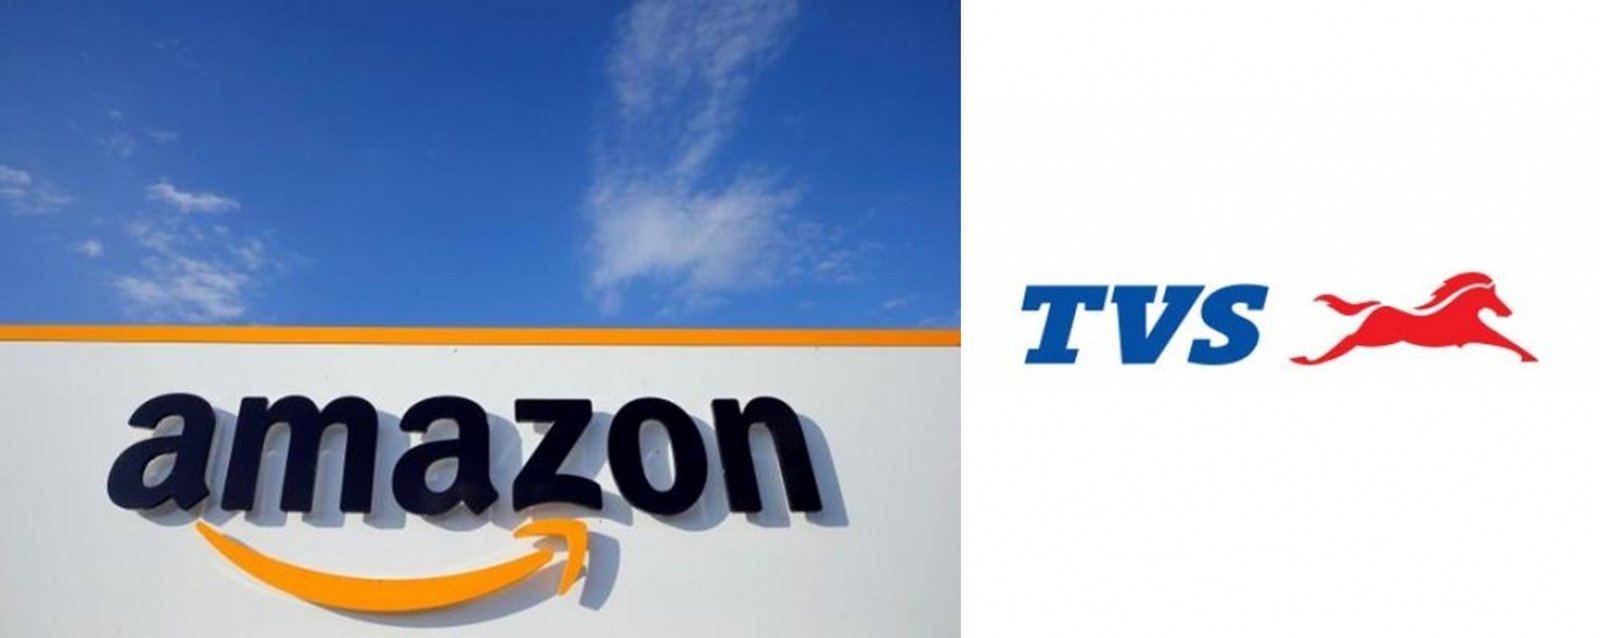 Amazon collaborates with TVS Motors to scale EV mobility in India